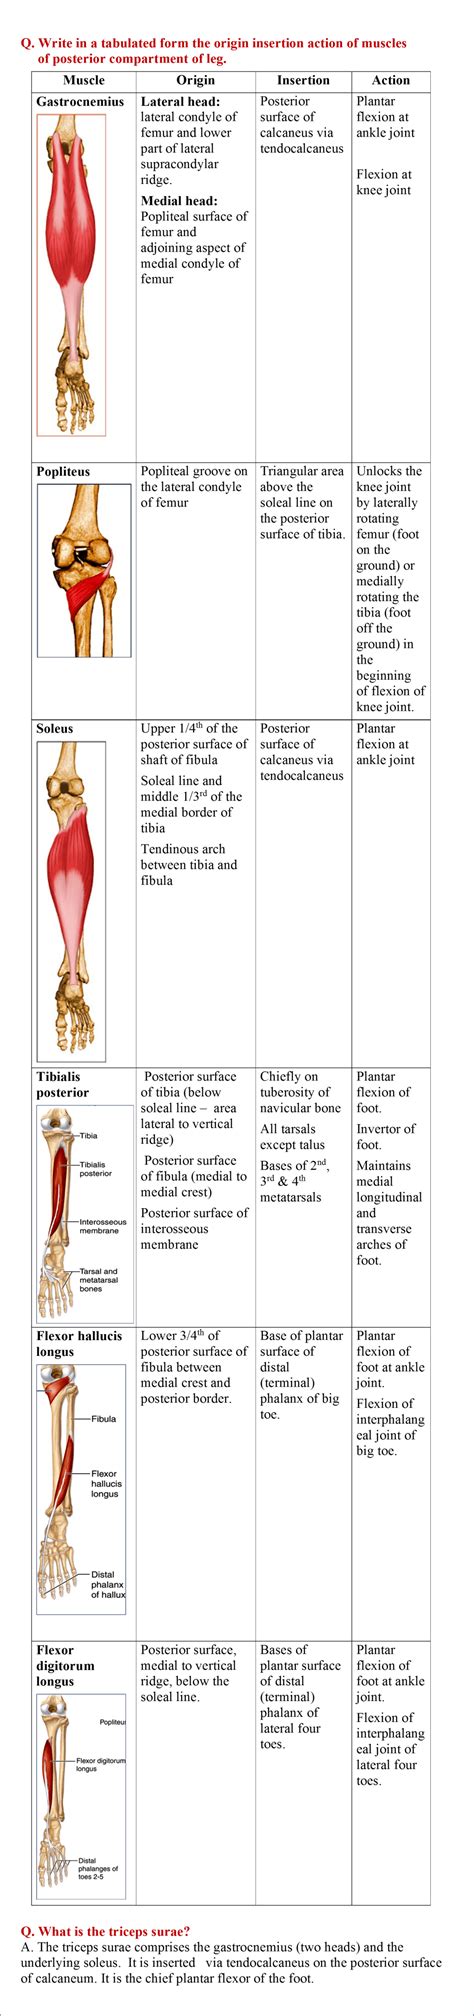 Leg - Anterior, Lateral and Posterior Compartments - Anatomy QA